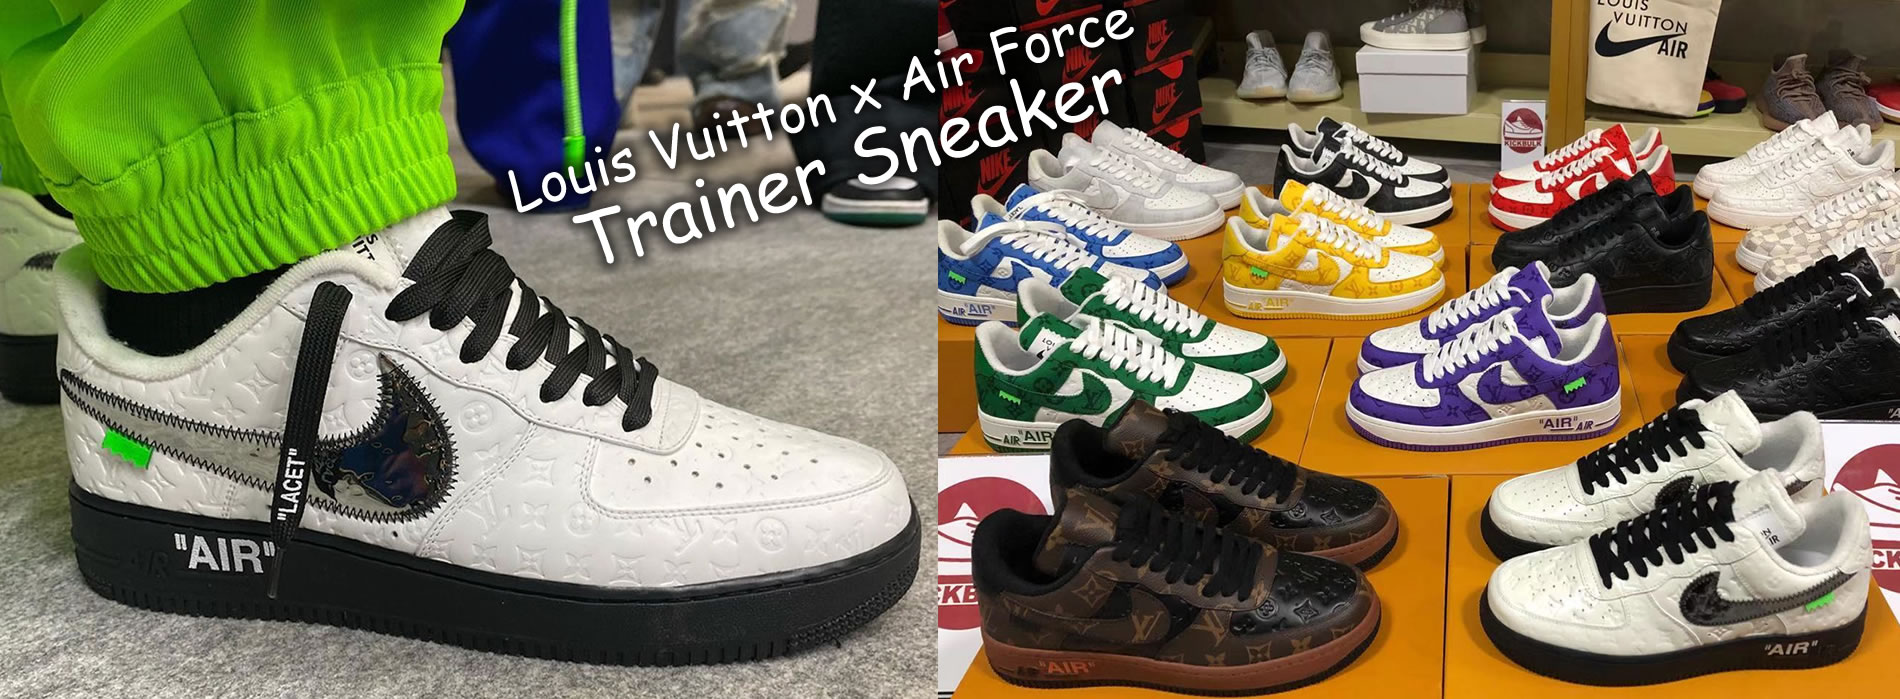 Louis Vuitton x If youve been following the sneaker ERX scene for a while now youll know just how the Trainer Sneaker